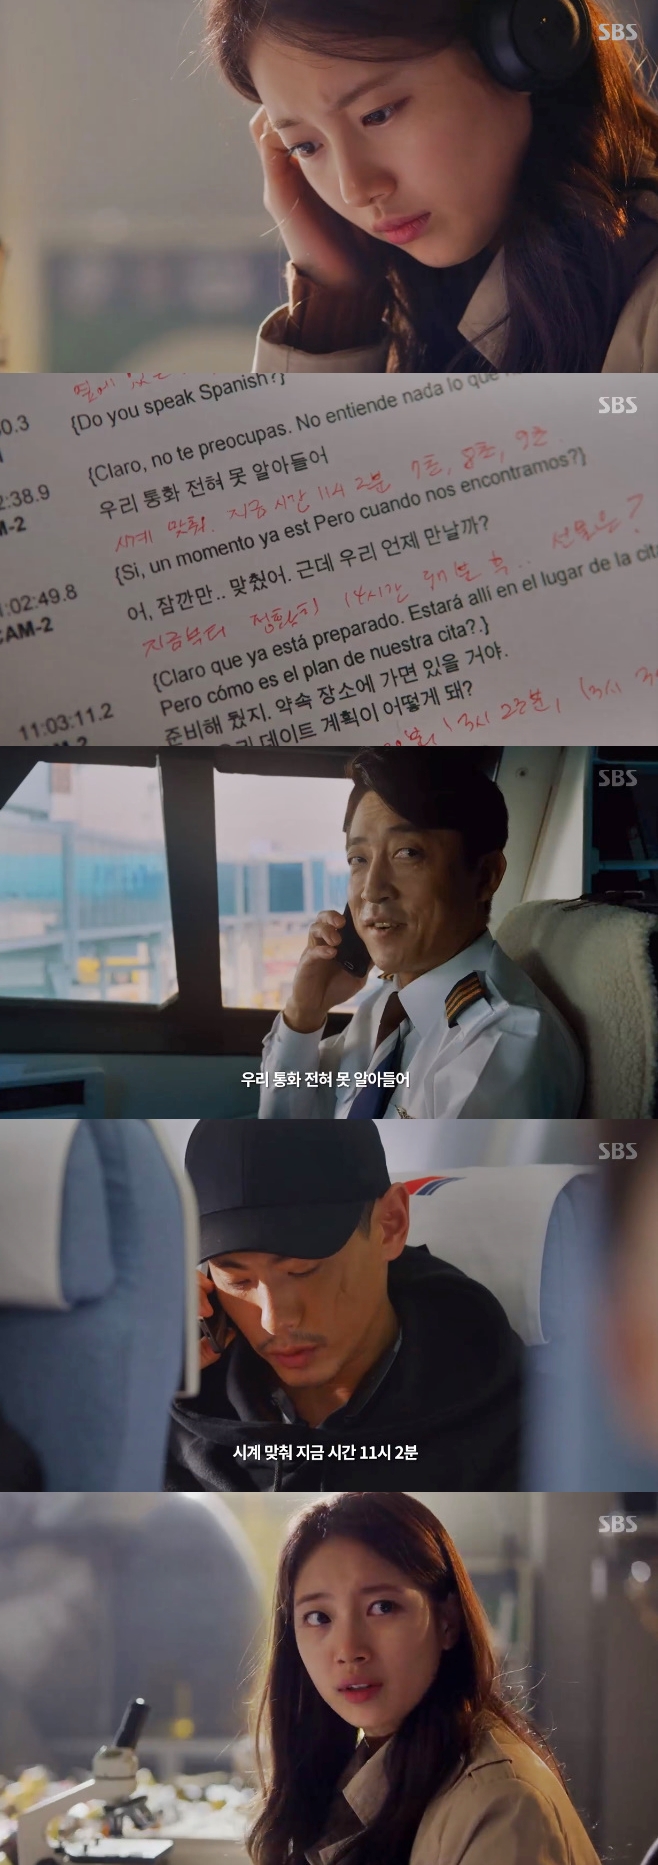 threatIn Vagabond, Bae Suzy found the civil aircraft terror context; Lee Seung-gi was frustrated and alone to find the terrorist, but had no income.In the SBS gilt drama Vagabond (playplayed by Jang Young-chul and directed by Yoo In-sik), which aired on the 21st night, Cha Dal-gun (Lee Seung-gi), who left for Morocco to recover the remains of his nephew who died in the Planes accident, was portrayed.Earlier, Chadalgan was injured after his nephew found out that the man in the video he sent just before Planes took off was alive and was walking Morocco.On the day of the broadcast, Cha Dal-gun appeared in the meeting place of the airline dynamic system official and the bereaved family with injuries.Cha Dal-geon, who appeared in a situation where Prince Edward Island Park (Lee Kyung-young) was comforting the bereaved families, claimed to him and the bereaved families that the Planes accident was caused by a terror, and that at the airport, Bae Suzy also claimed he would have seen the man.Eventually, Prince Edward Island Park, Gohari and the bereaved families checked the airport CCTV along with Chadalgun, but the person who claimed Chadalgun was alive was not on CCTV.Chadalgan, who saw the other mans face, claimed that theyre dropping Planes, and they can manipulate the CCTV level, but everyone thought he was out of his mind with sadness and shock.So, Cha Dal-gun went to his accommodation to hand over his nephews last video directly to Gohari.He pointed the gun at Chadalgan, who wandered in front of his house, and Chadalgan suspected that such a confession was a team with a terrorist, took the gun and overpowered him, and began to search the house.In the process, Cha Dal-geon found the identification card of the National Intelligence Service of Gohari and learned the real identity of Gohari.After that, he sent a video of Cha Dal-geons video to a colleague of the NIS in Korea to analyze the video, which contained the conversation before the takeoff of a suspected terrorist.Analysis showed he was speaking Spanish.Meanwhile, the bereaved families returned to Korea after the memorial service, but Chadalgan remained in Morocco to try to track down the incident.Cha Dal-gun, who returned to the hostel, tried to upload his nephews video to the Internet, but the video was erased and the room was stolen and the laptop disappeared.Cha Dal-gun was arrested by local police for allegedly fighting a hotel employee and was detained in a detention center after a riot.Cha Dal-geon was also in a difficult situation because he was in a disorder in the investigation with the hotel staff.At the same time, the terrorist infiltrated the house of the confession and confirmed that he had received a video of his nephew, and lurked to kill the confession.But just before he opened the front door of the house, he received a phone call from the NIS boss and left to see the black box of the civilian aircraft.After that, the confession read the black box video and heard the deputy chief talking in Spanish before takeoff and felt doubt.Confessing the fact that the man in the video had spoken in Spanish, Confessor began to compare the interpretations of the two conversations, and inferred that they were the codes of the terrorist who disguised the conversation of the lover, knowing that the conversations of the two people were necessarily fit.